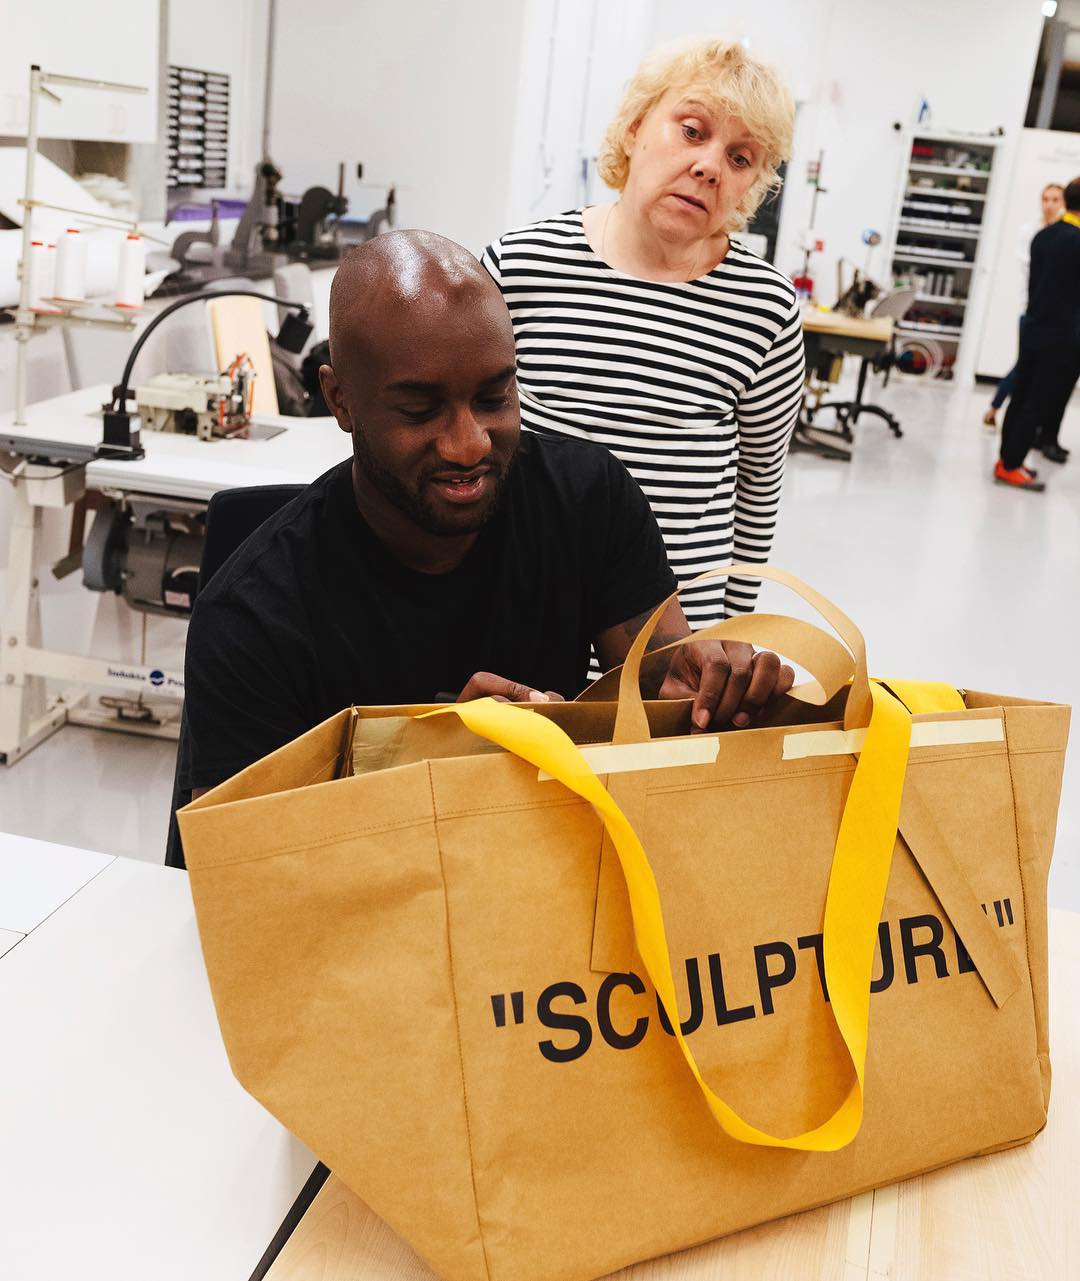 Vintage Markerad chair by Virgil Abloh for Ikea Off-white in 2023